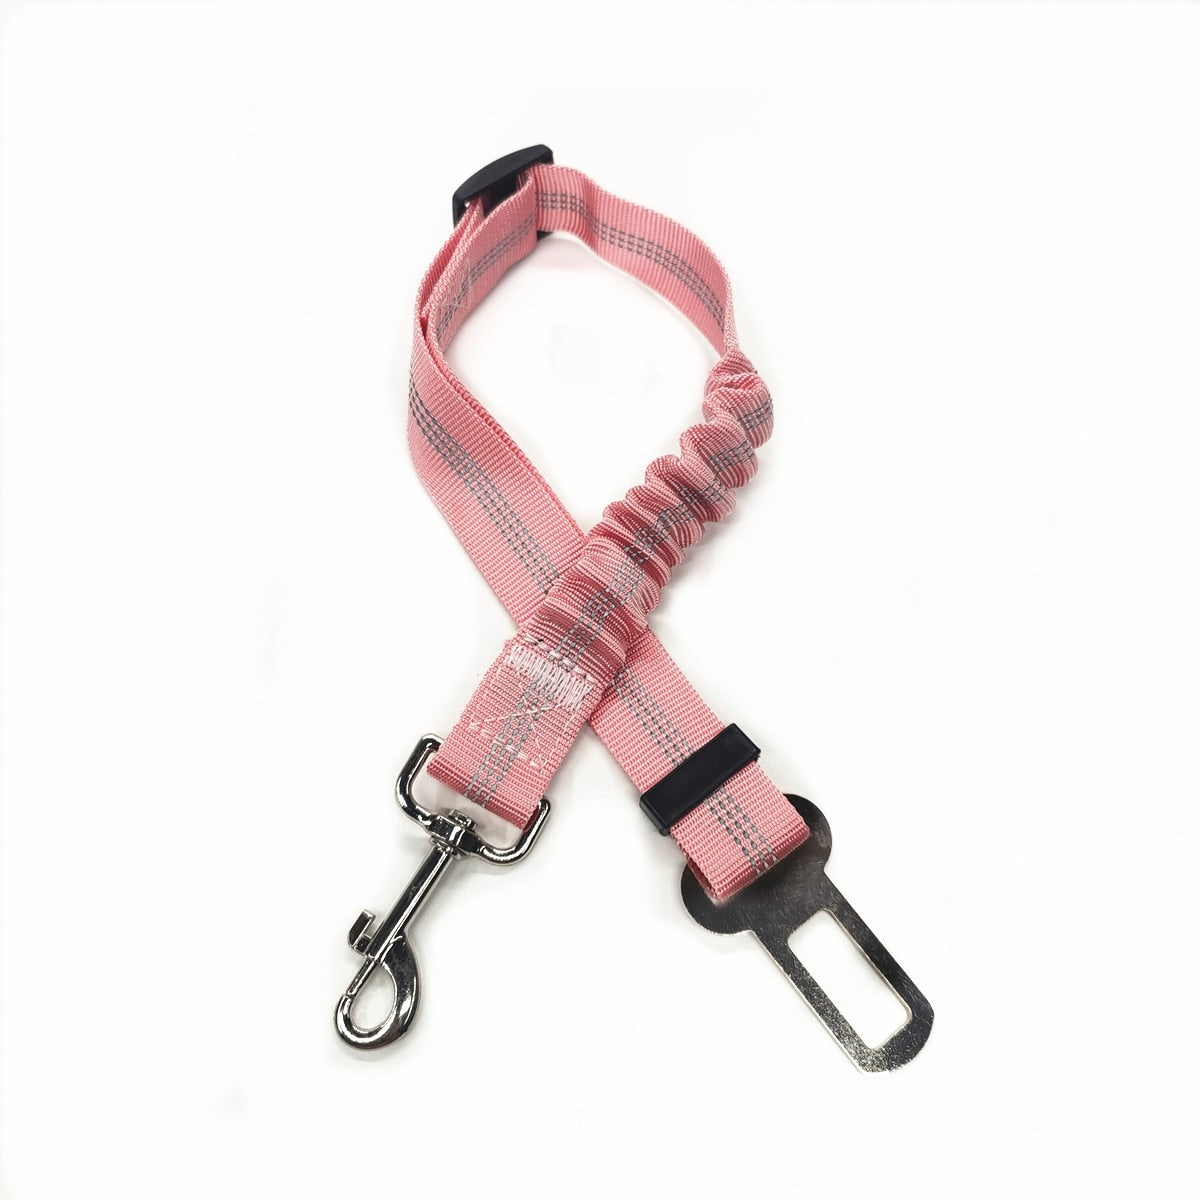 Adjustable Pet Car Seat Belt and Safety Harness for Cats and Dogs PetTech Paradise